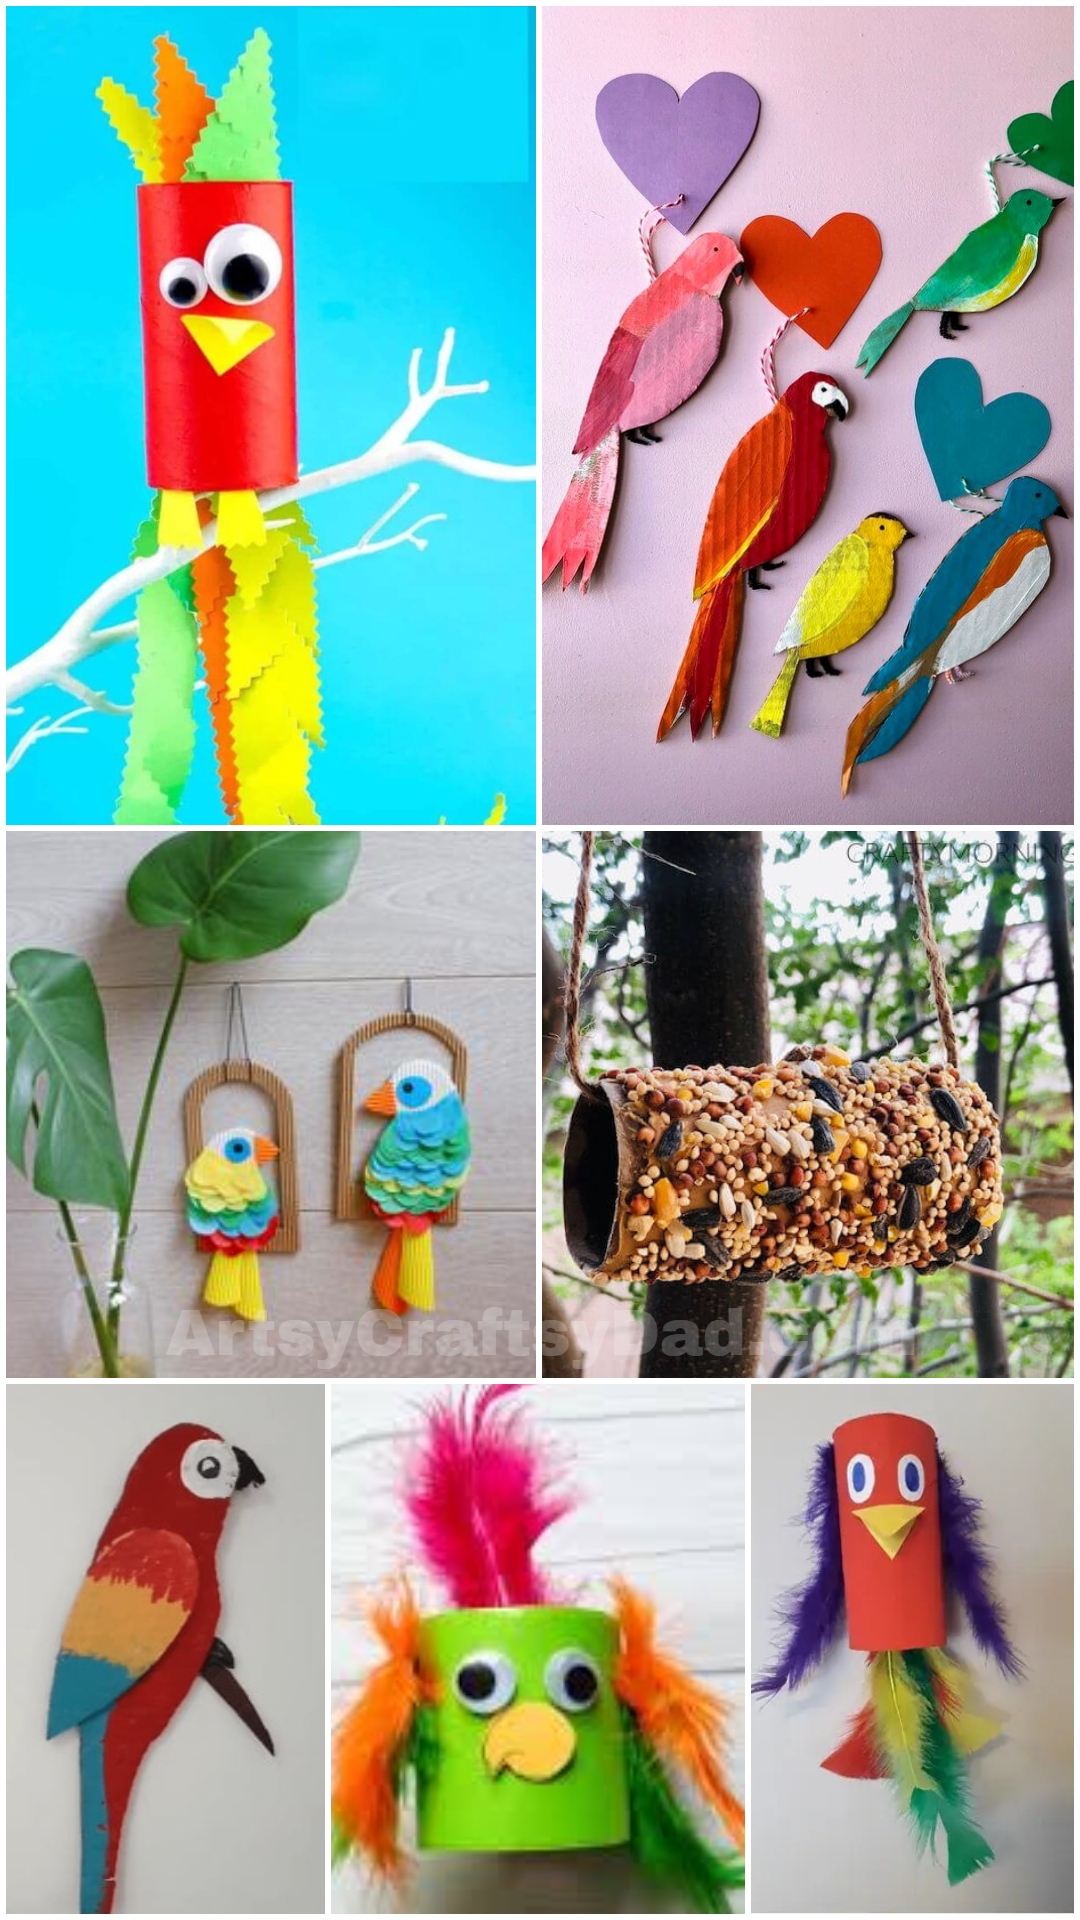 How to Make Parrot Cardboard Crafts